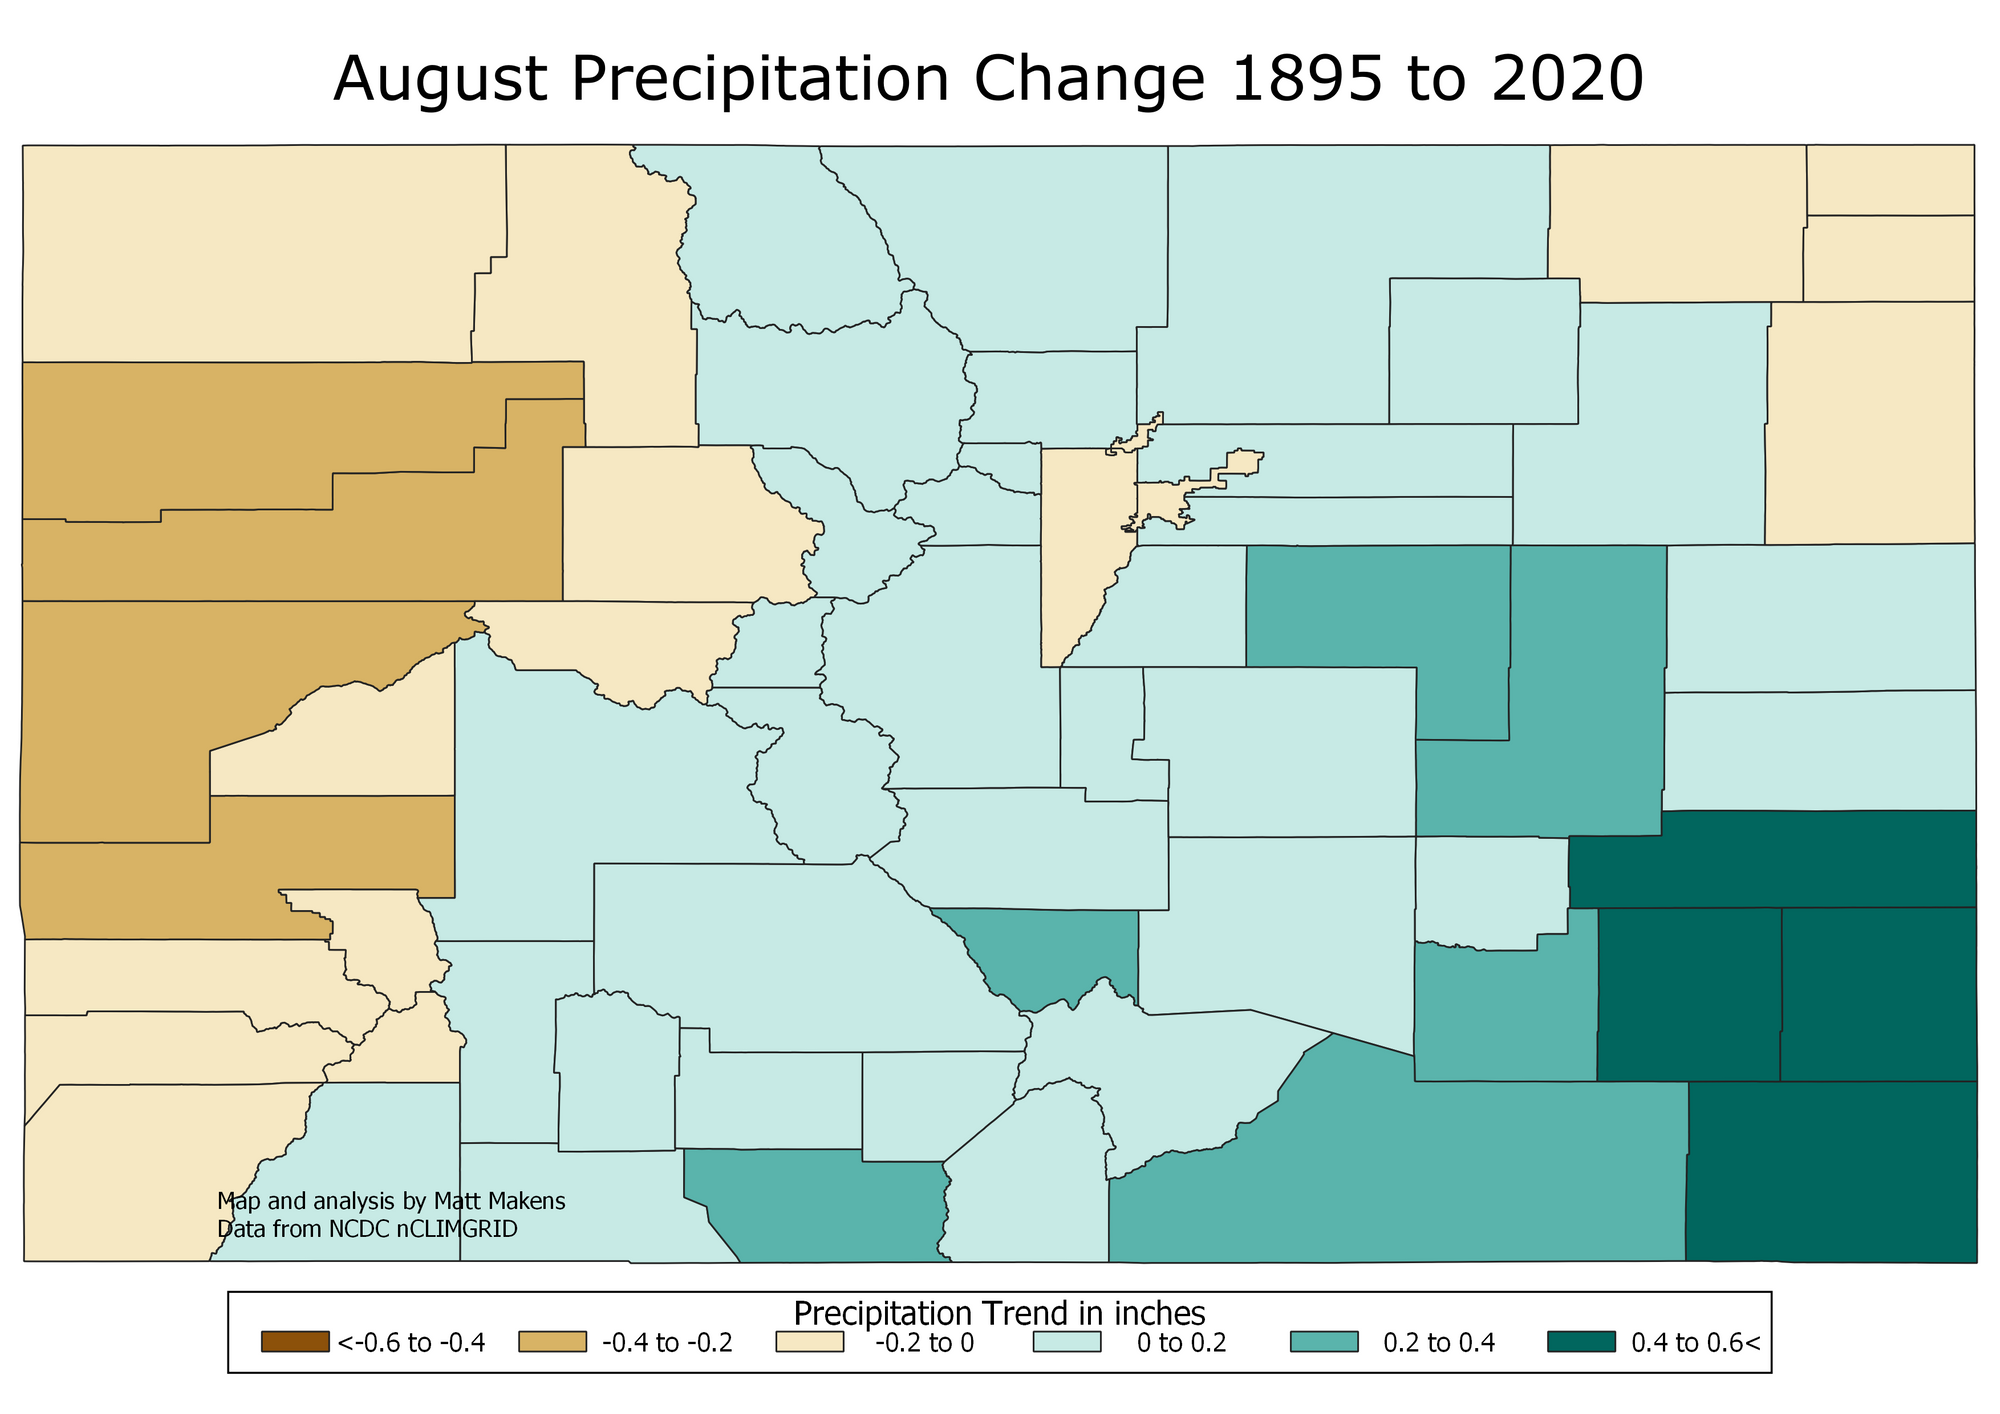 Analyzing Colorado's precipitation trends over the last 125 years